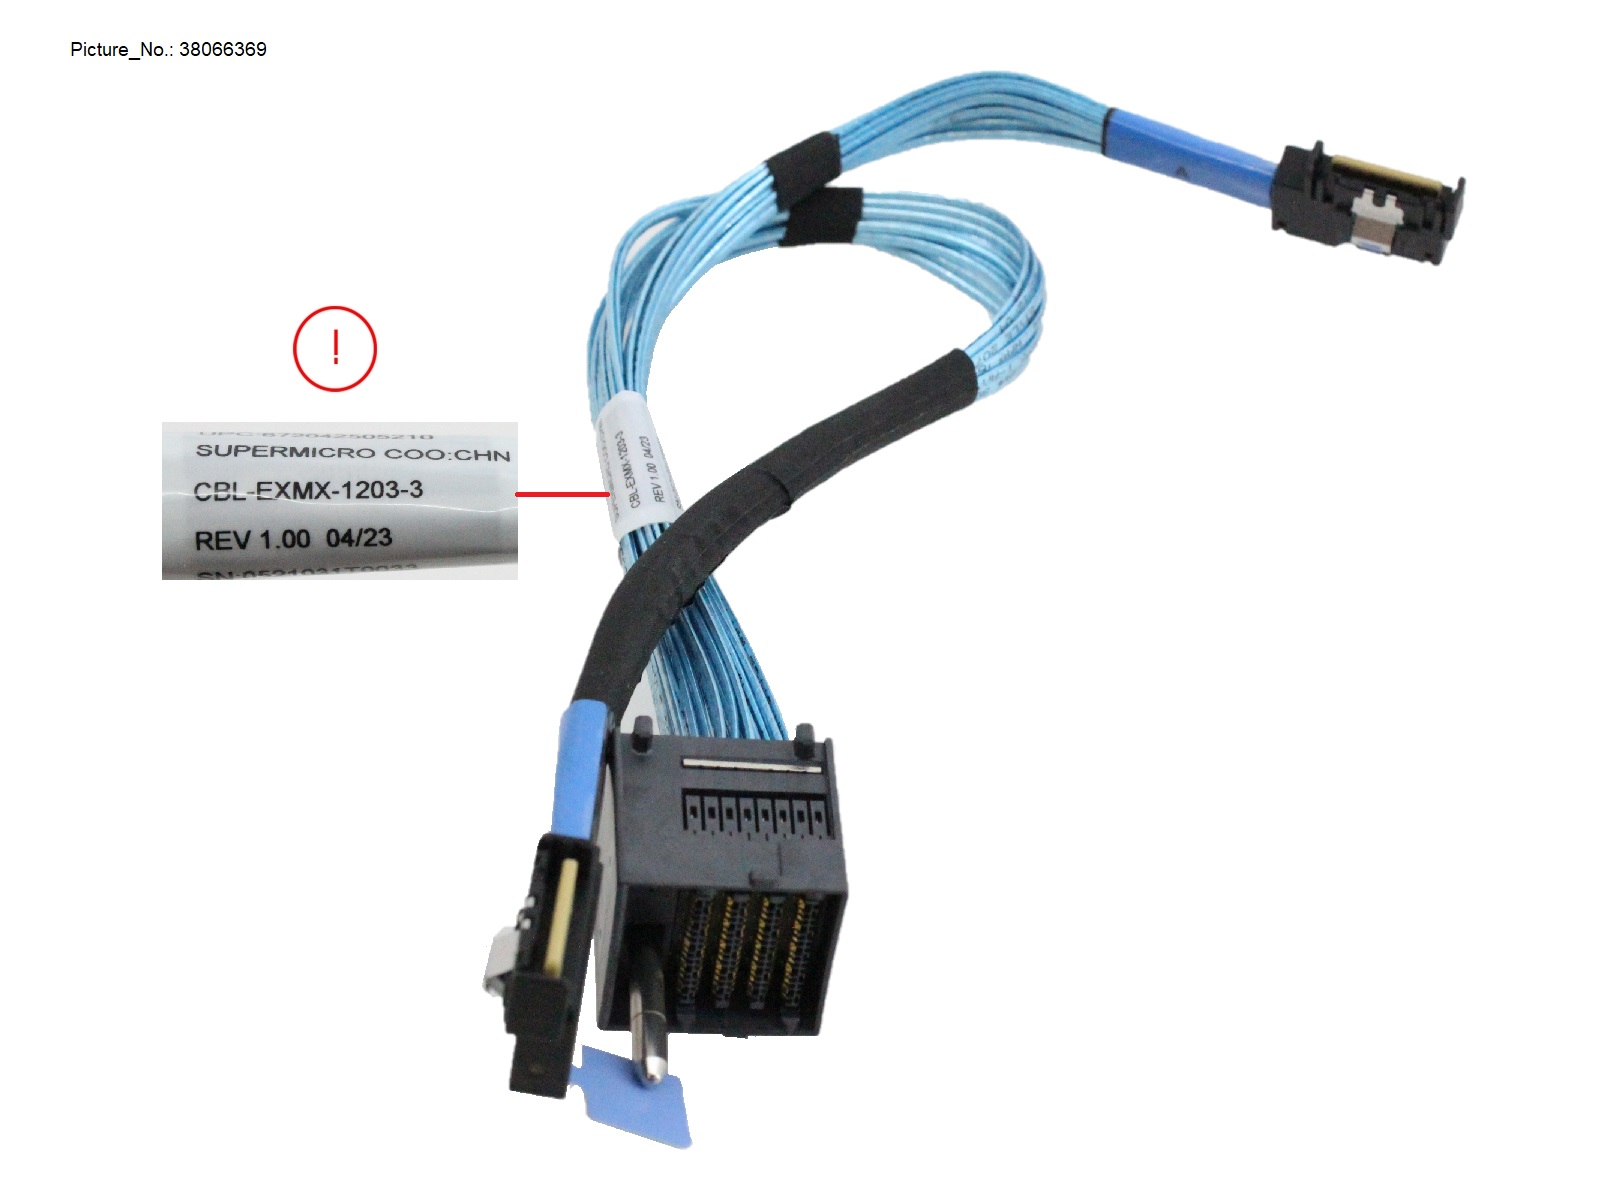 PCIE CABLE 314MM (MB TO PCIEB)